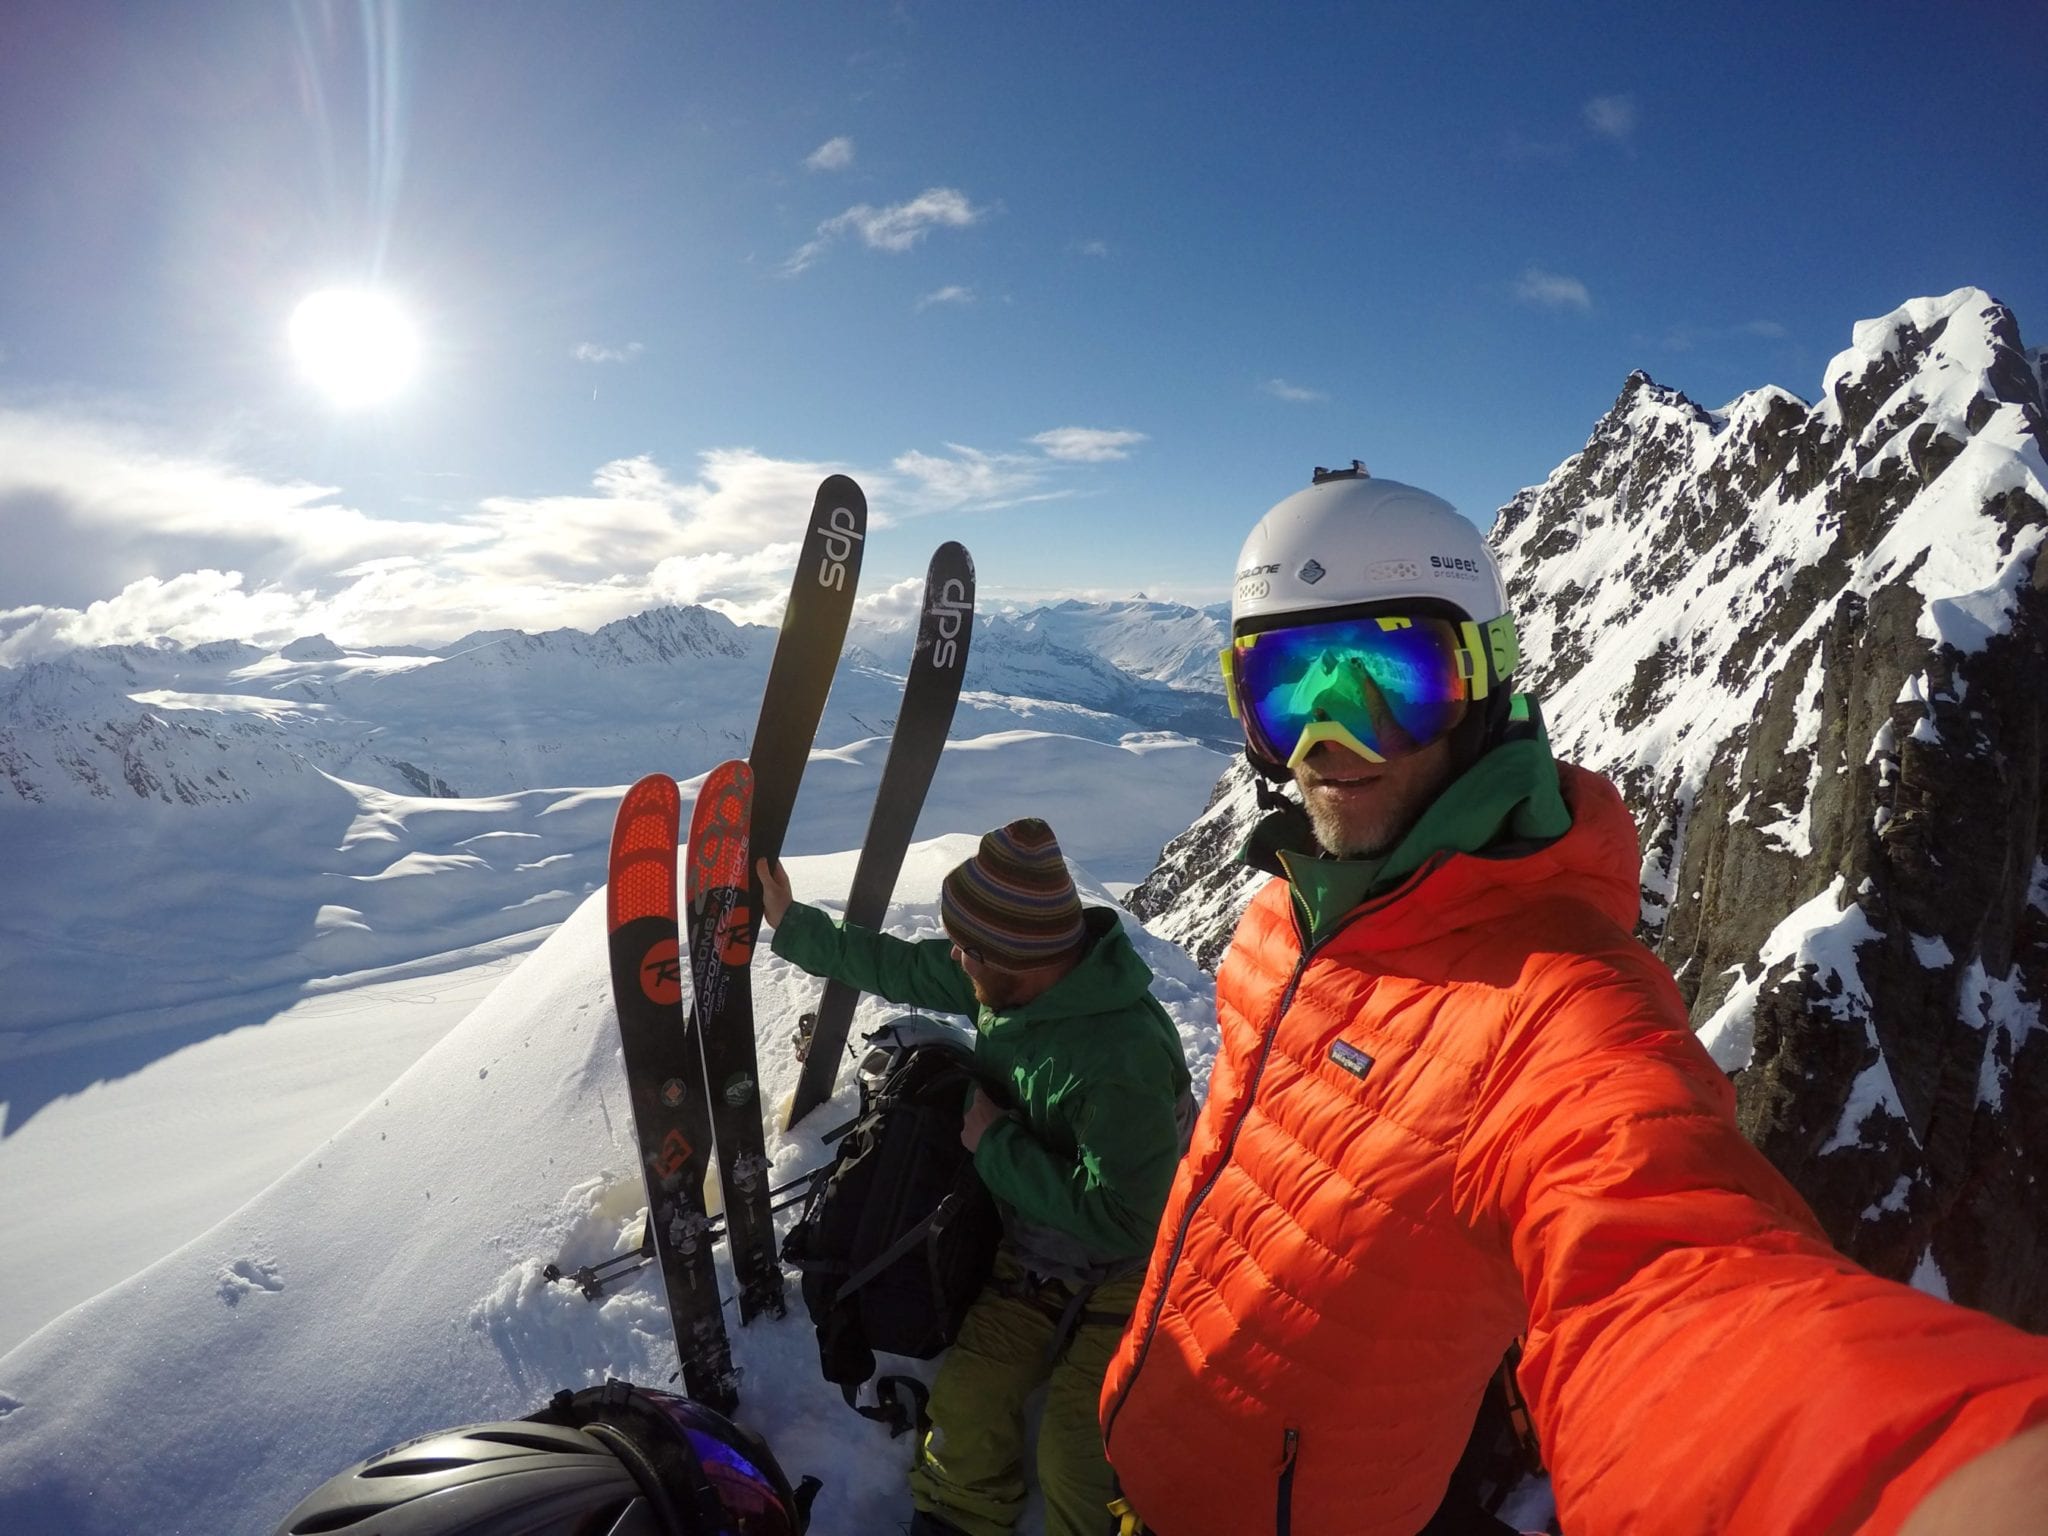 Will Taggart stoked on another incredible summit.